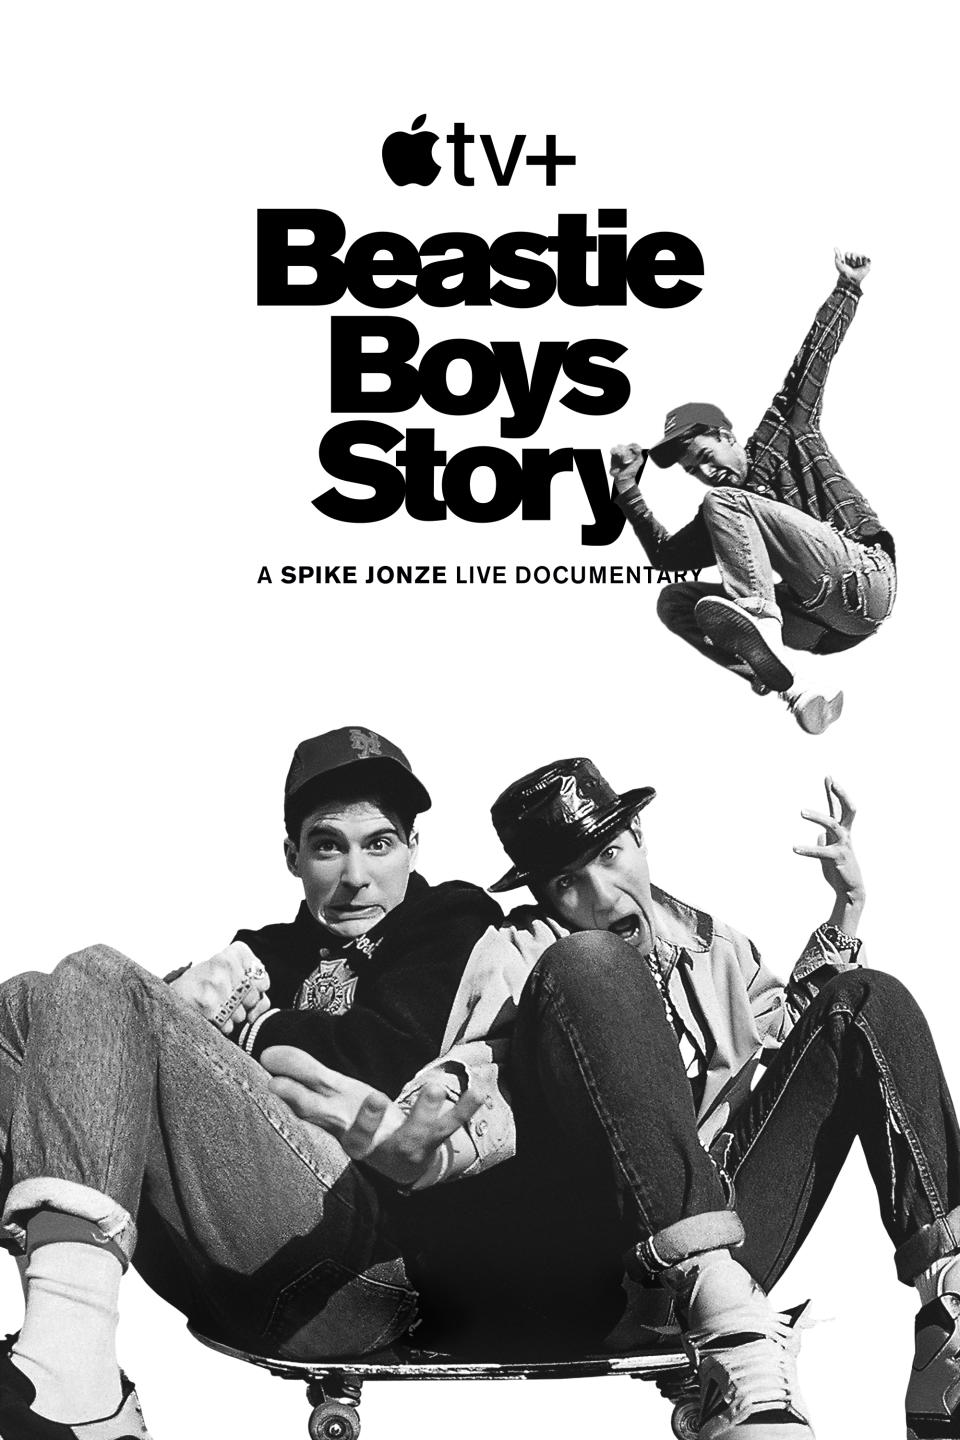 This image released by Apple TV Plus shows cover art for the documentary "Beastie Boys Story," about the iconic New York City group debuting Thursday on Apple TV Plus. (Apple TV Plus via AP)